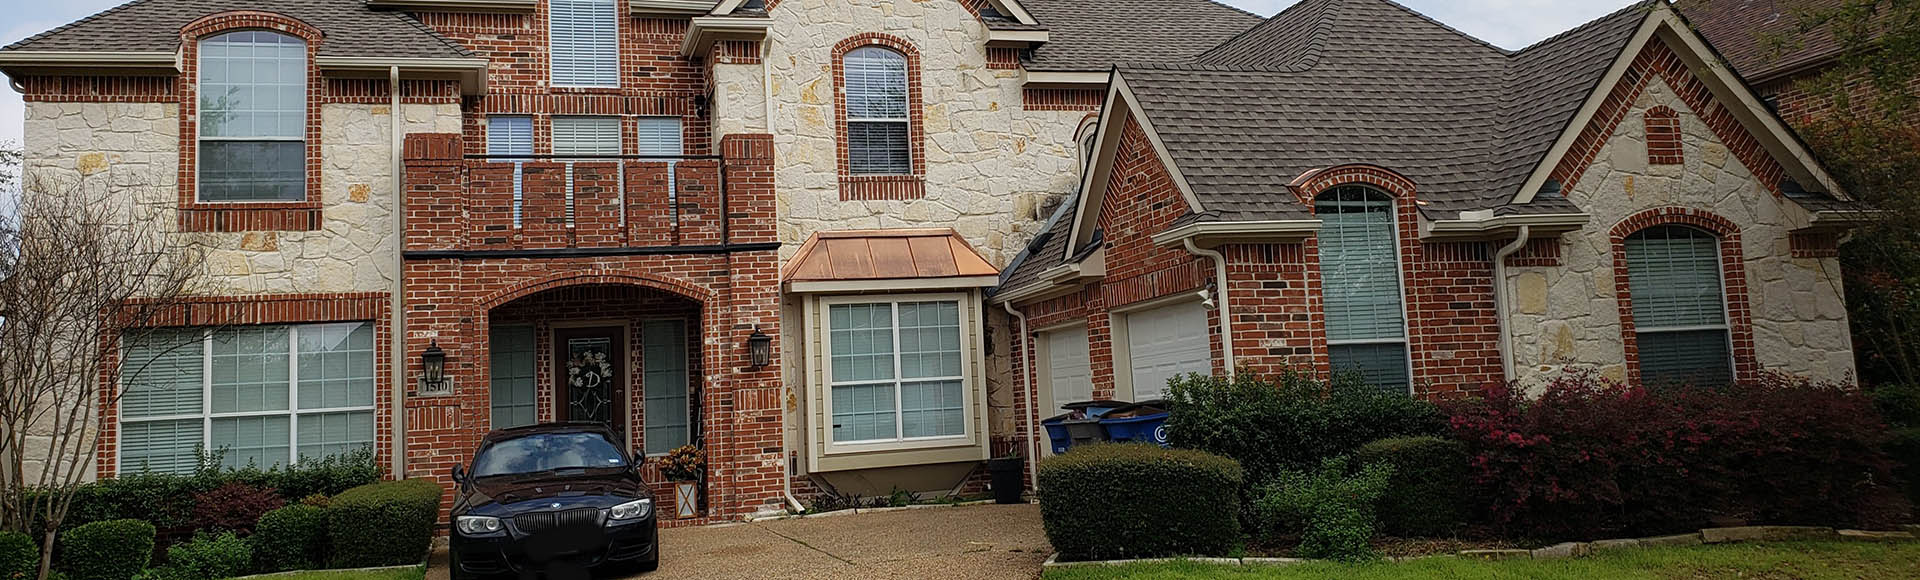 Mckinney General Contractor, Roofing Company and Roofing Contractor